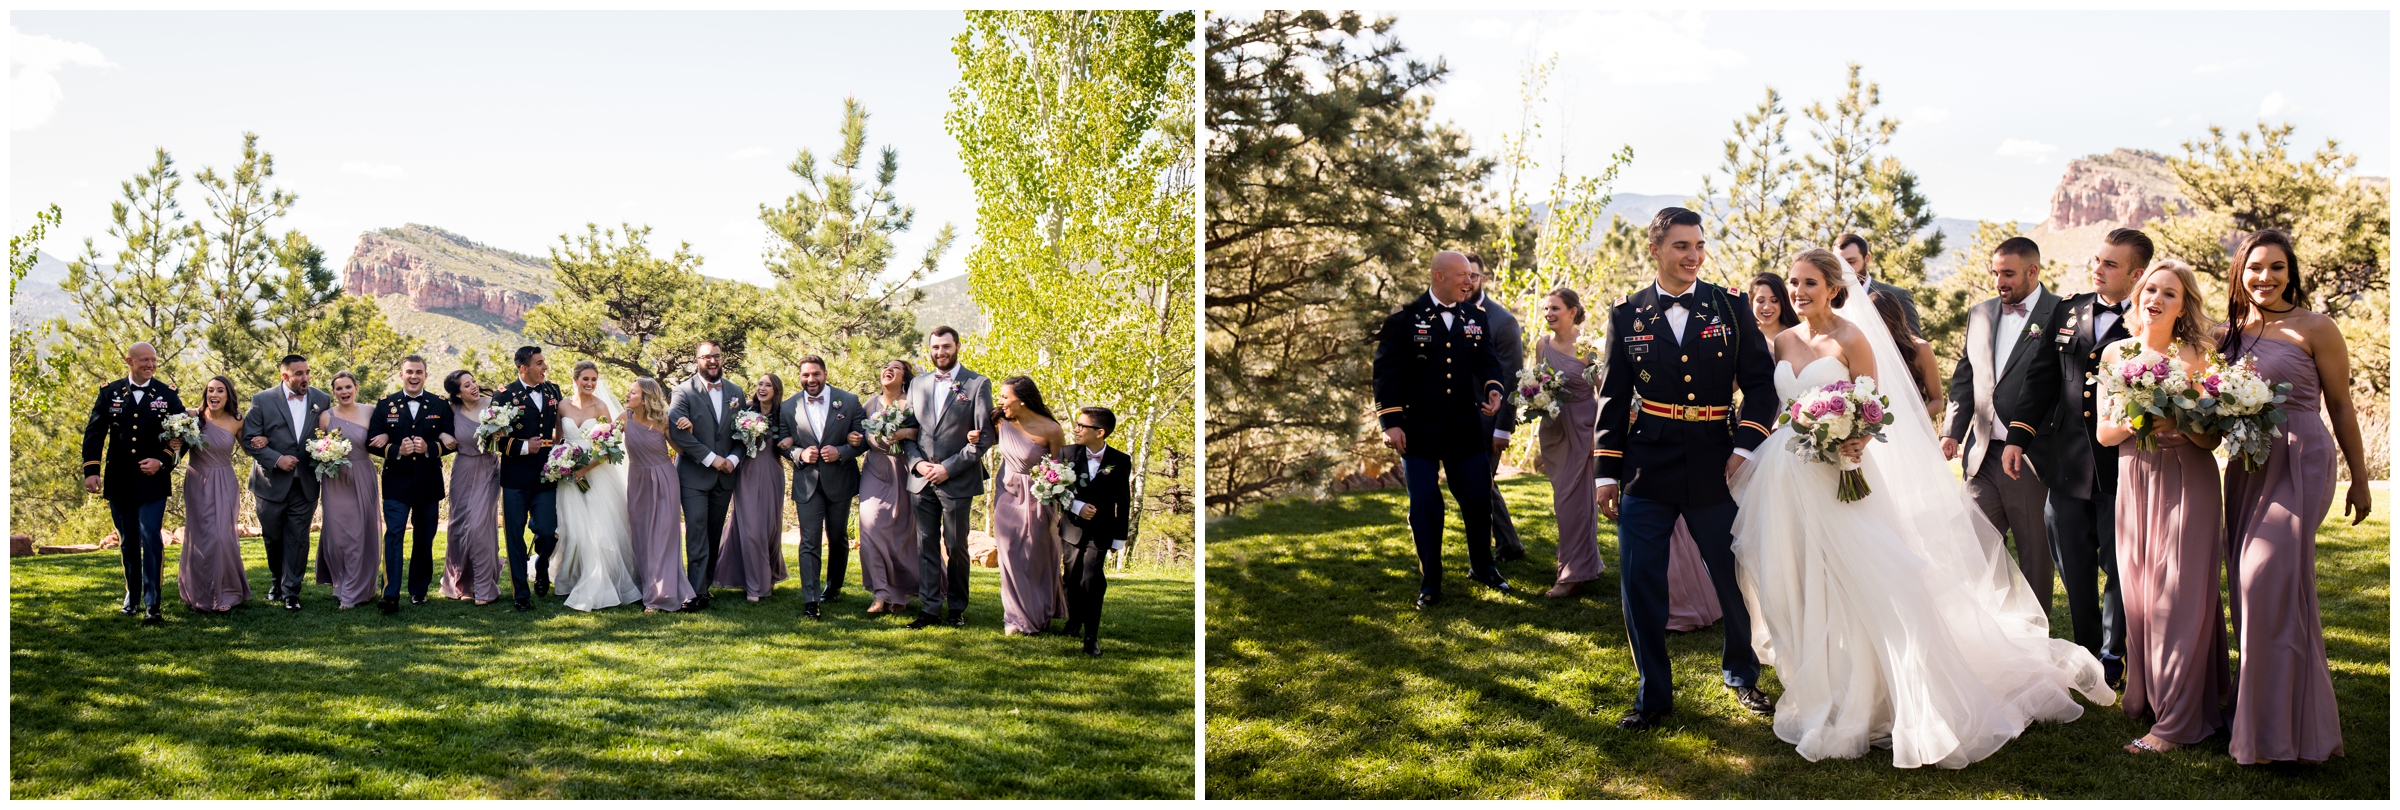 bridal party in lilac and gray walking behind Lionscrest Manor wedding venue 